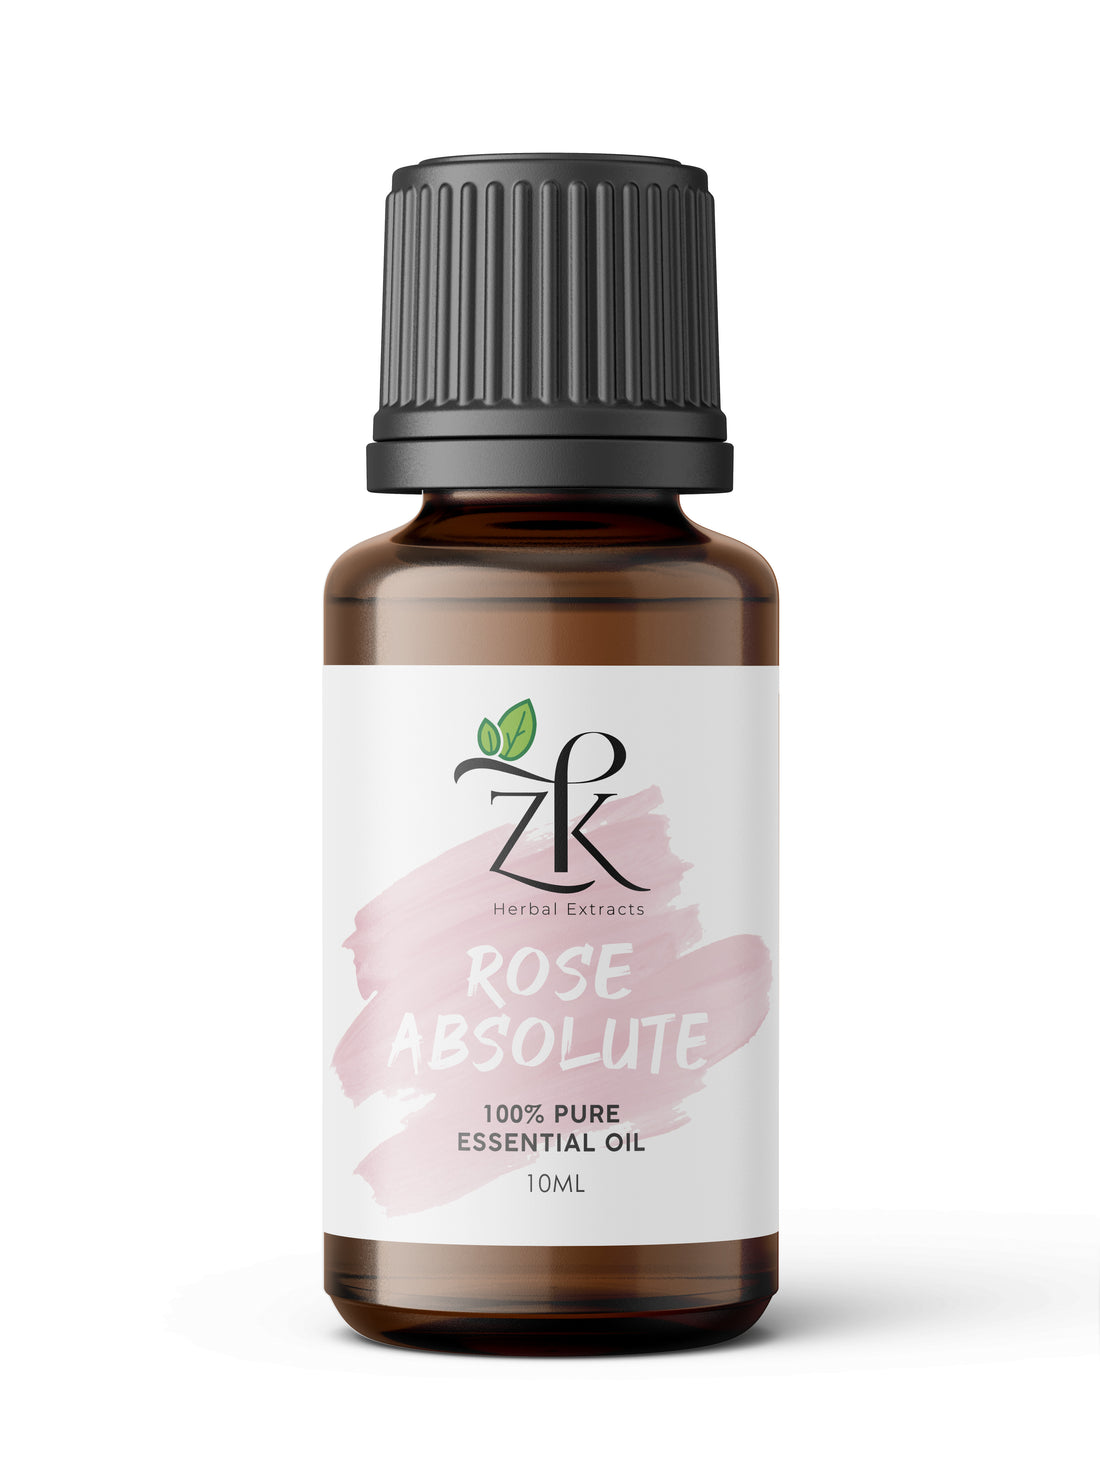 ZK Rose Absolute Essential Oil 10mL